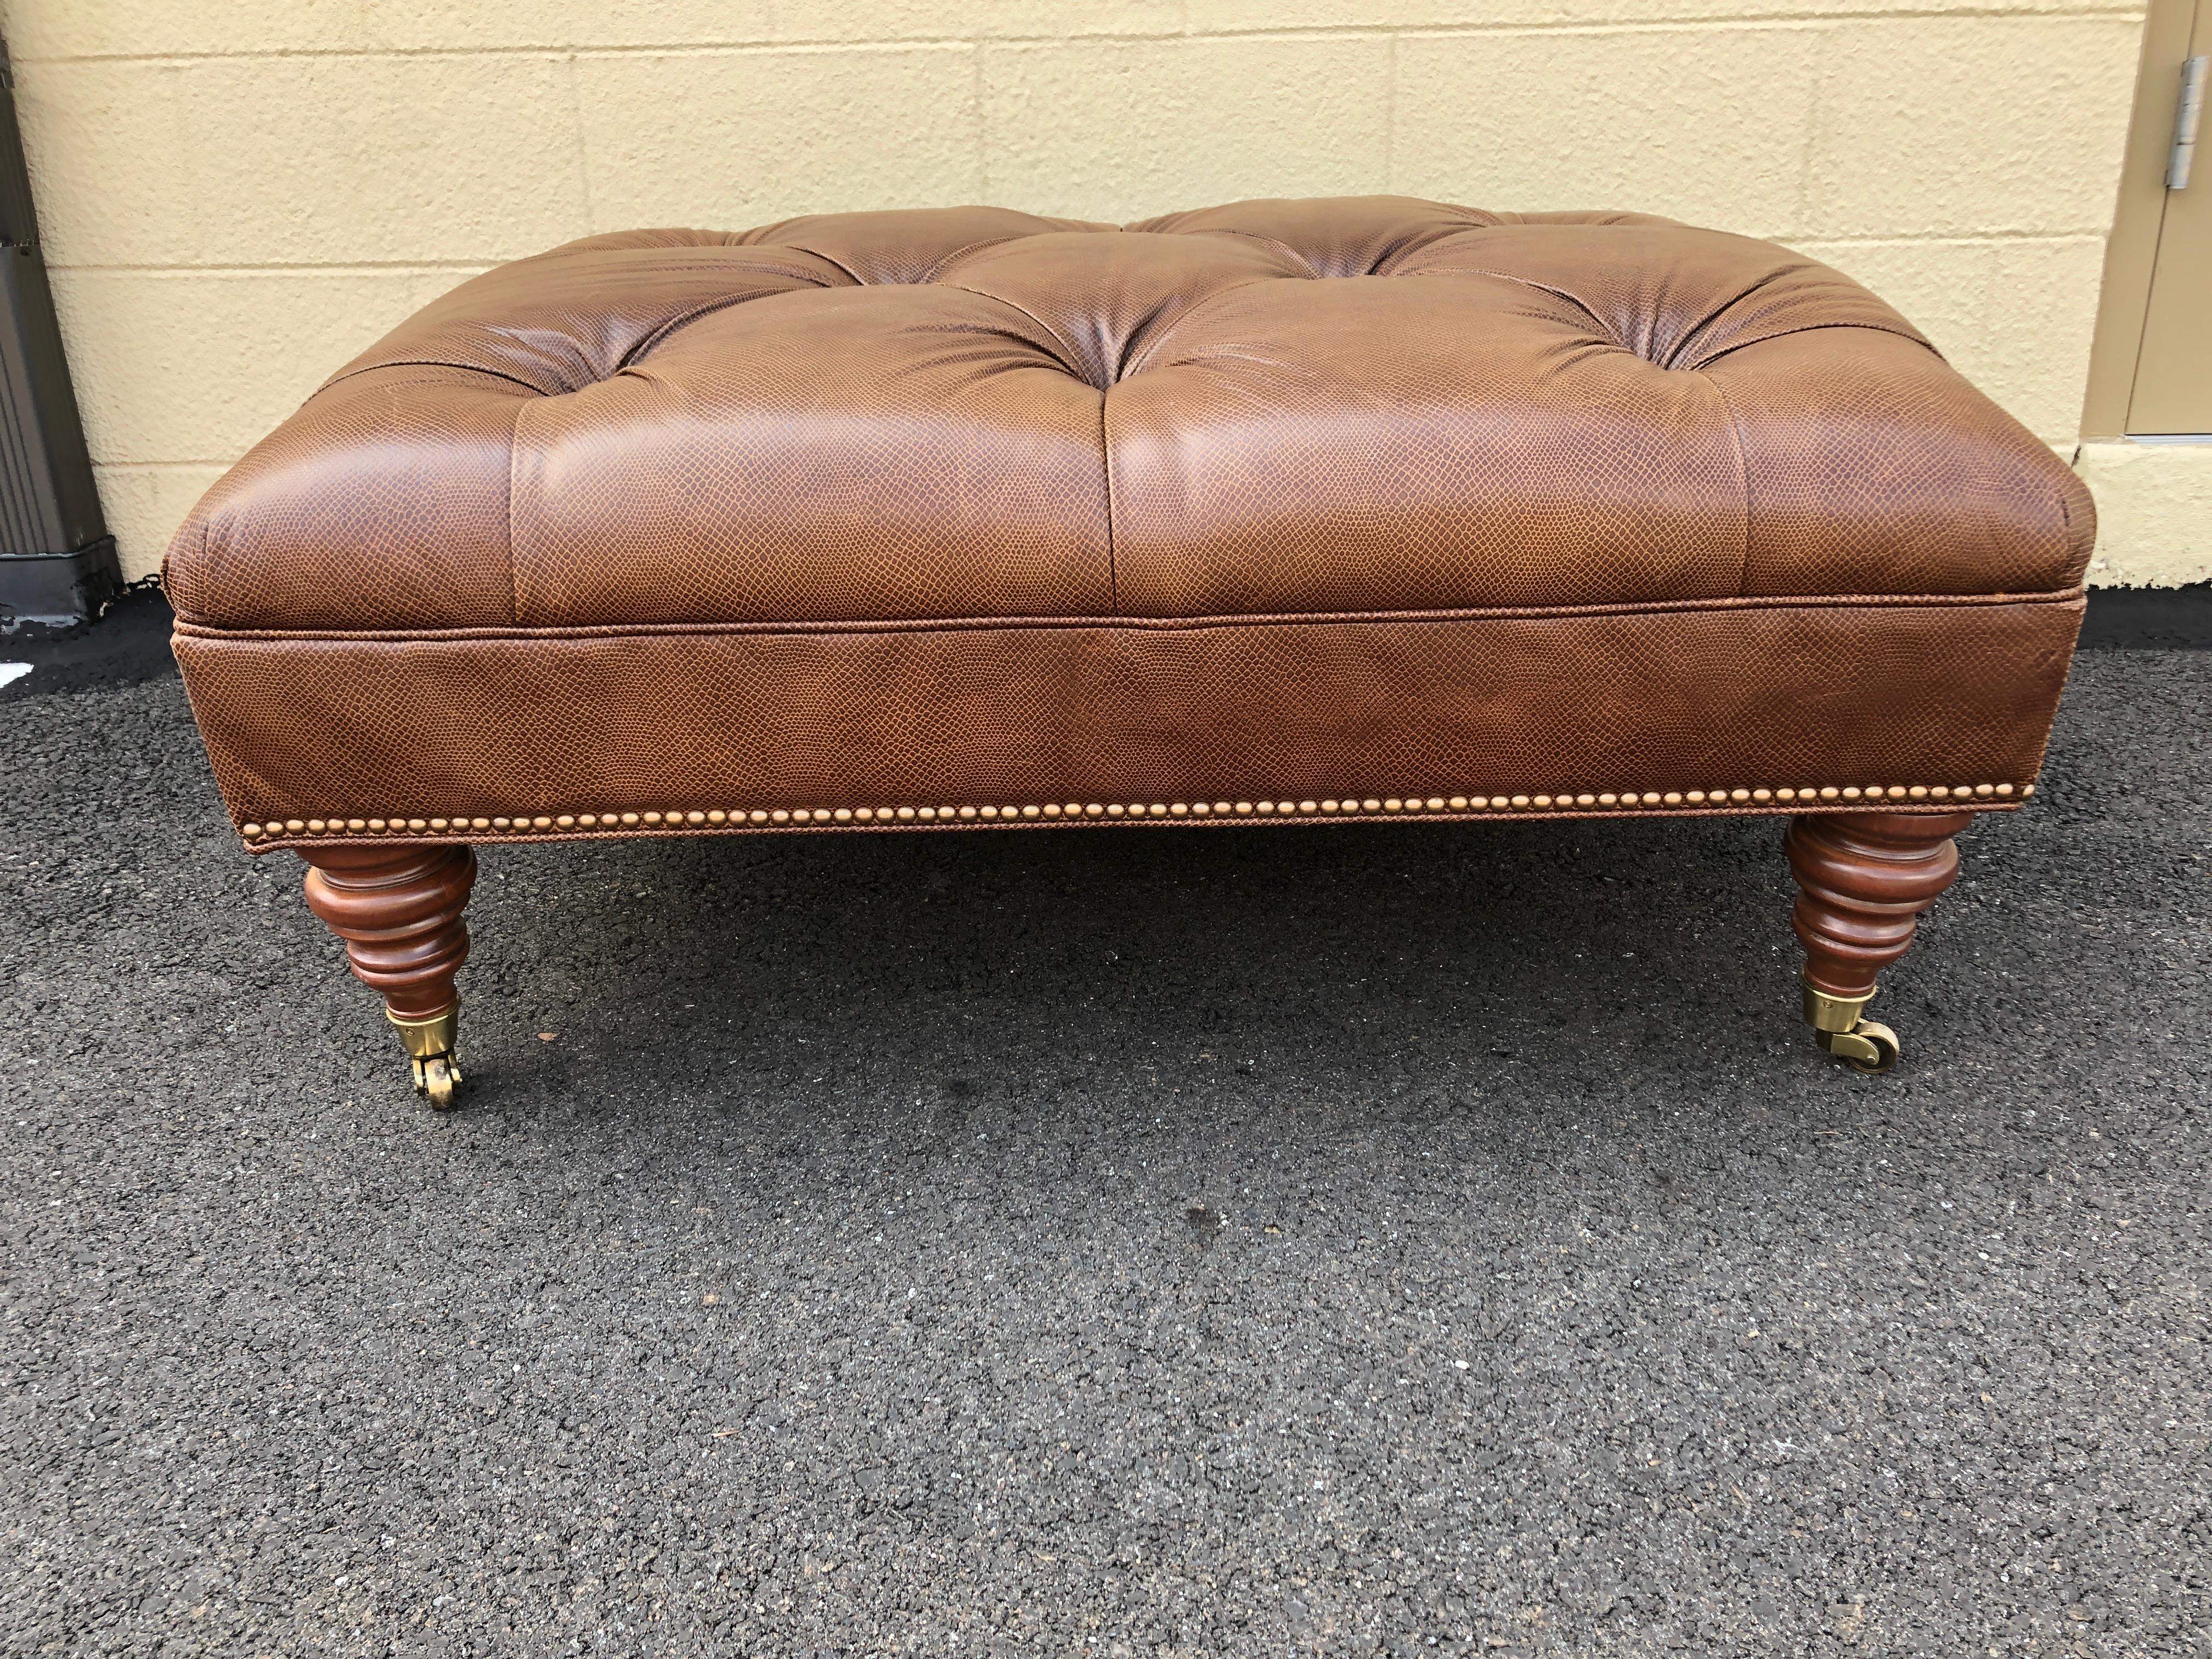 American Handsome Embossed Leather Tufted Ottoman Coffee Table